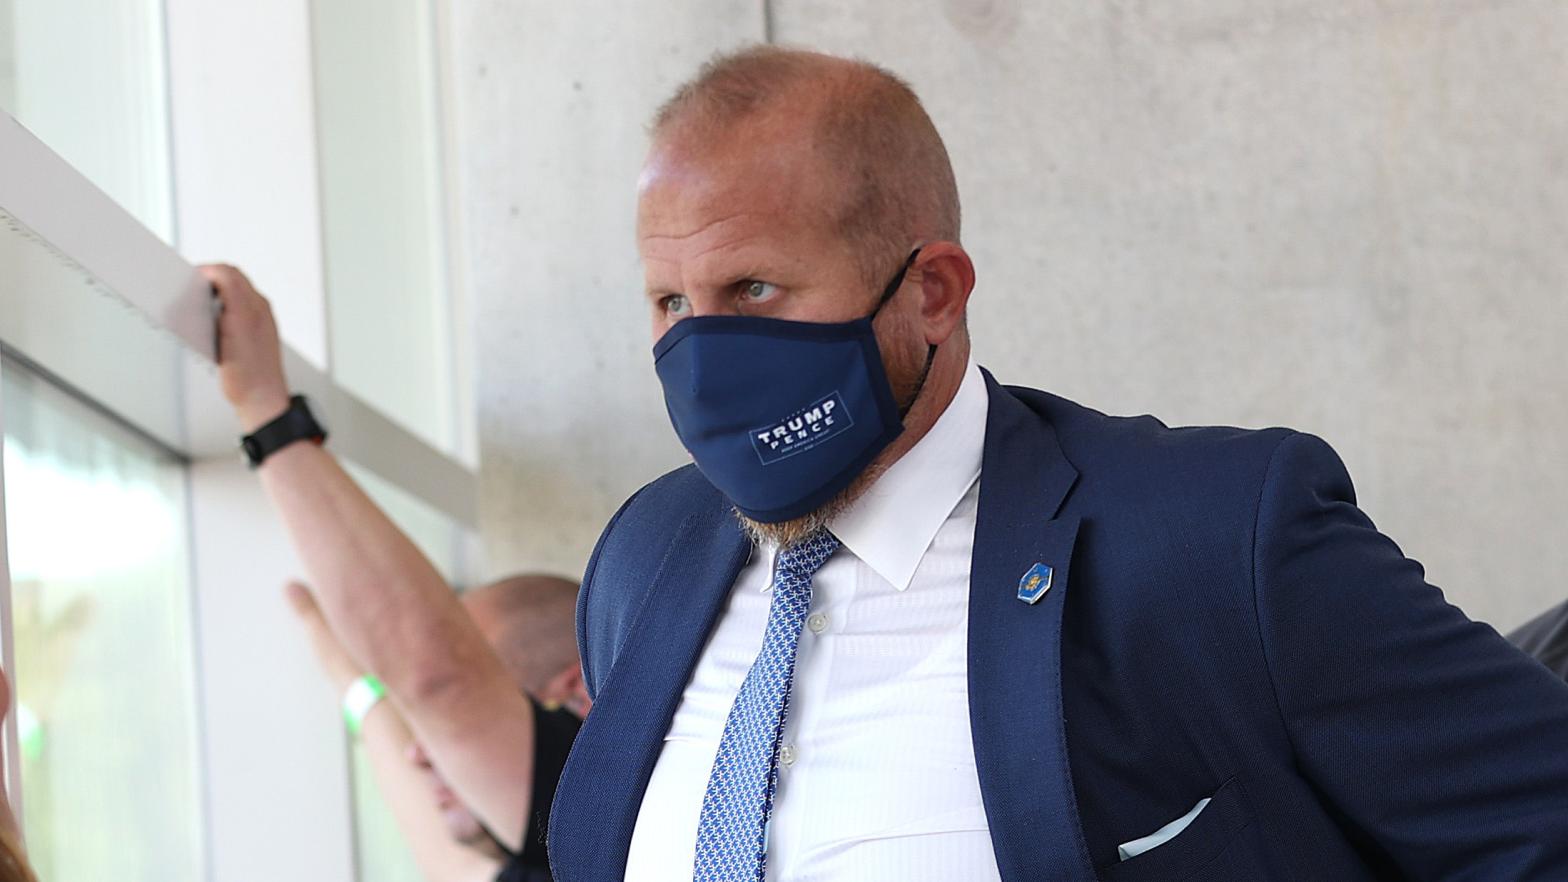 Then-Trump campaign manager Brad Parscale at a rally in Tulsa, Oklahoma in June 2020. (Photo: Win McNamee, Getty Images)